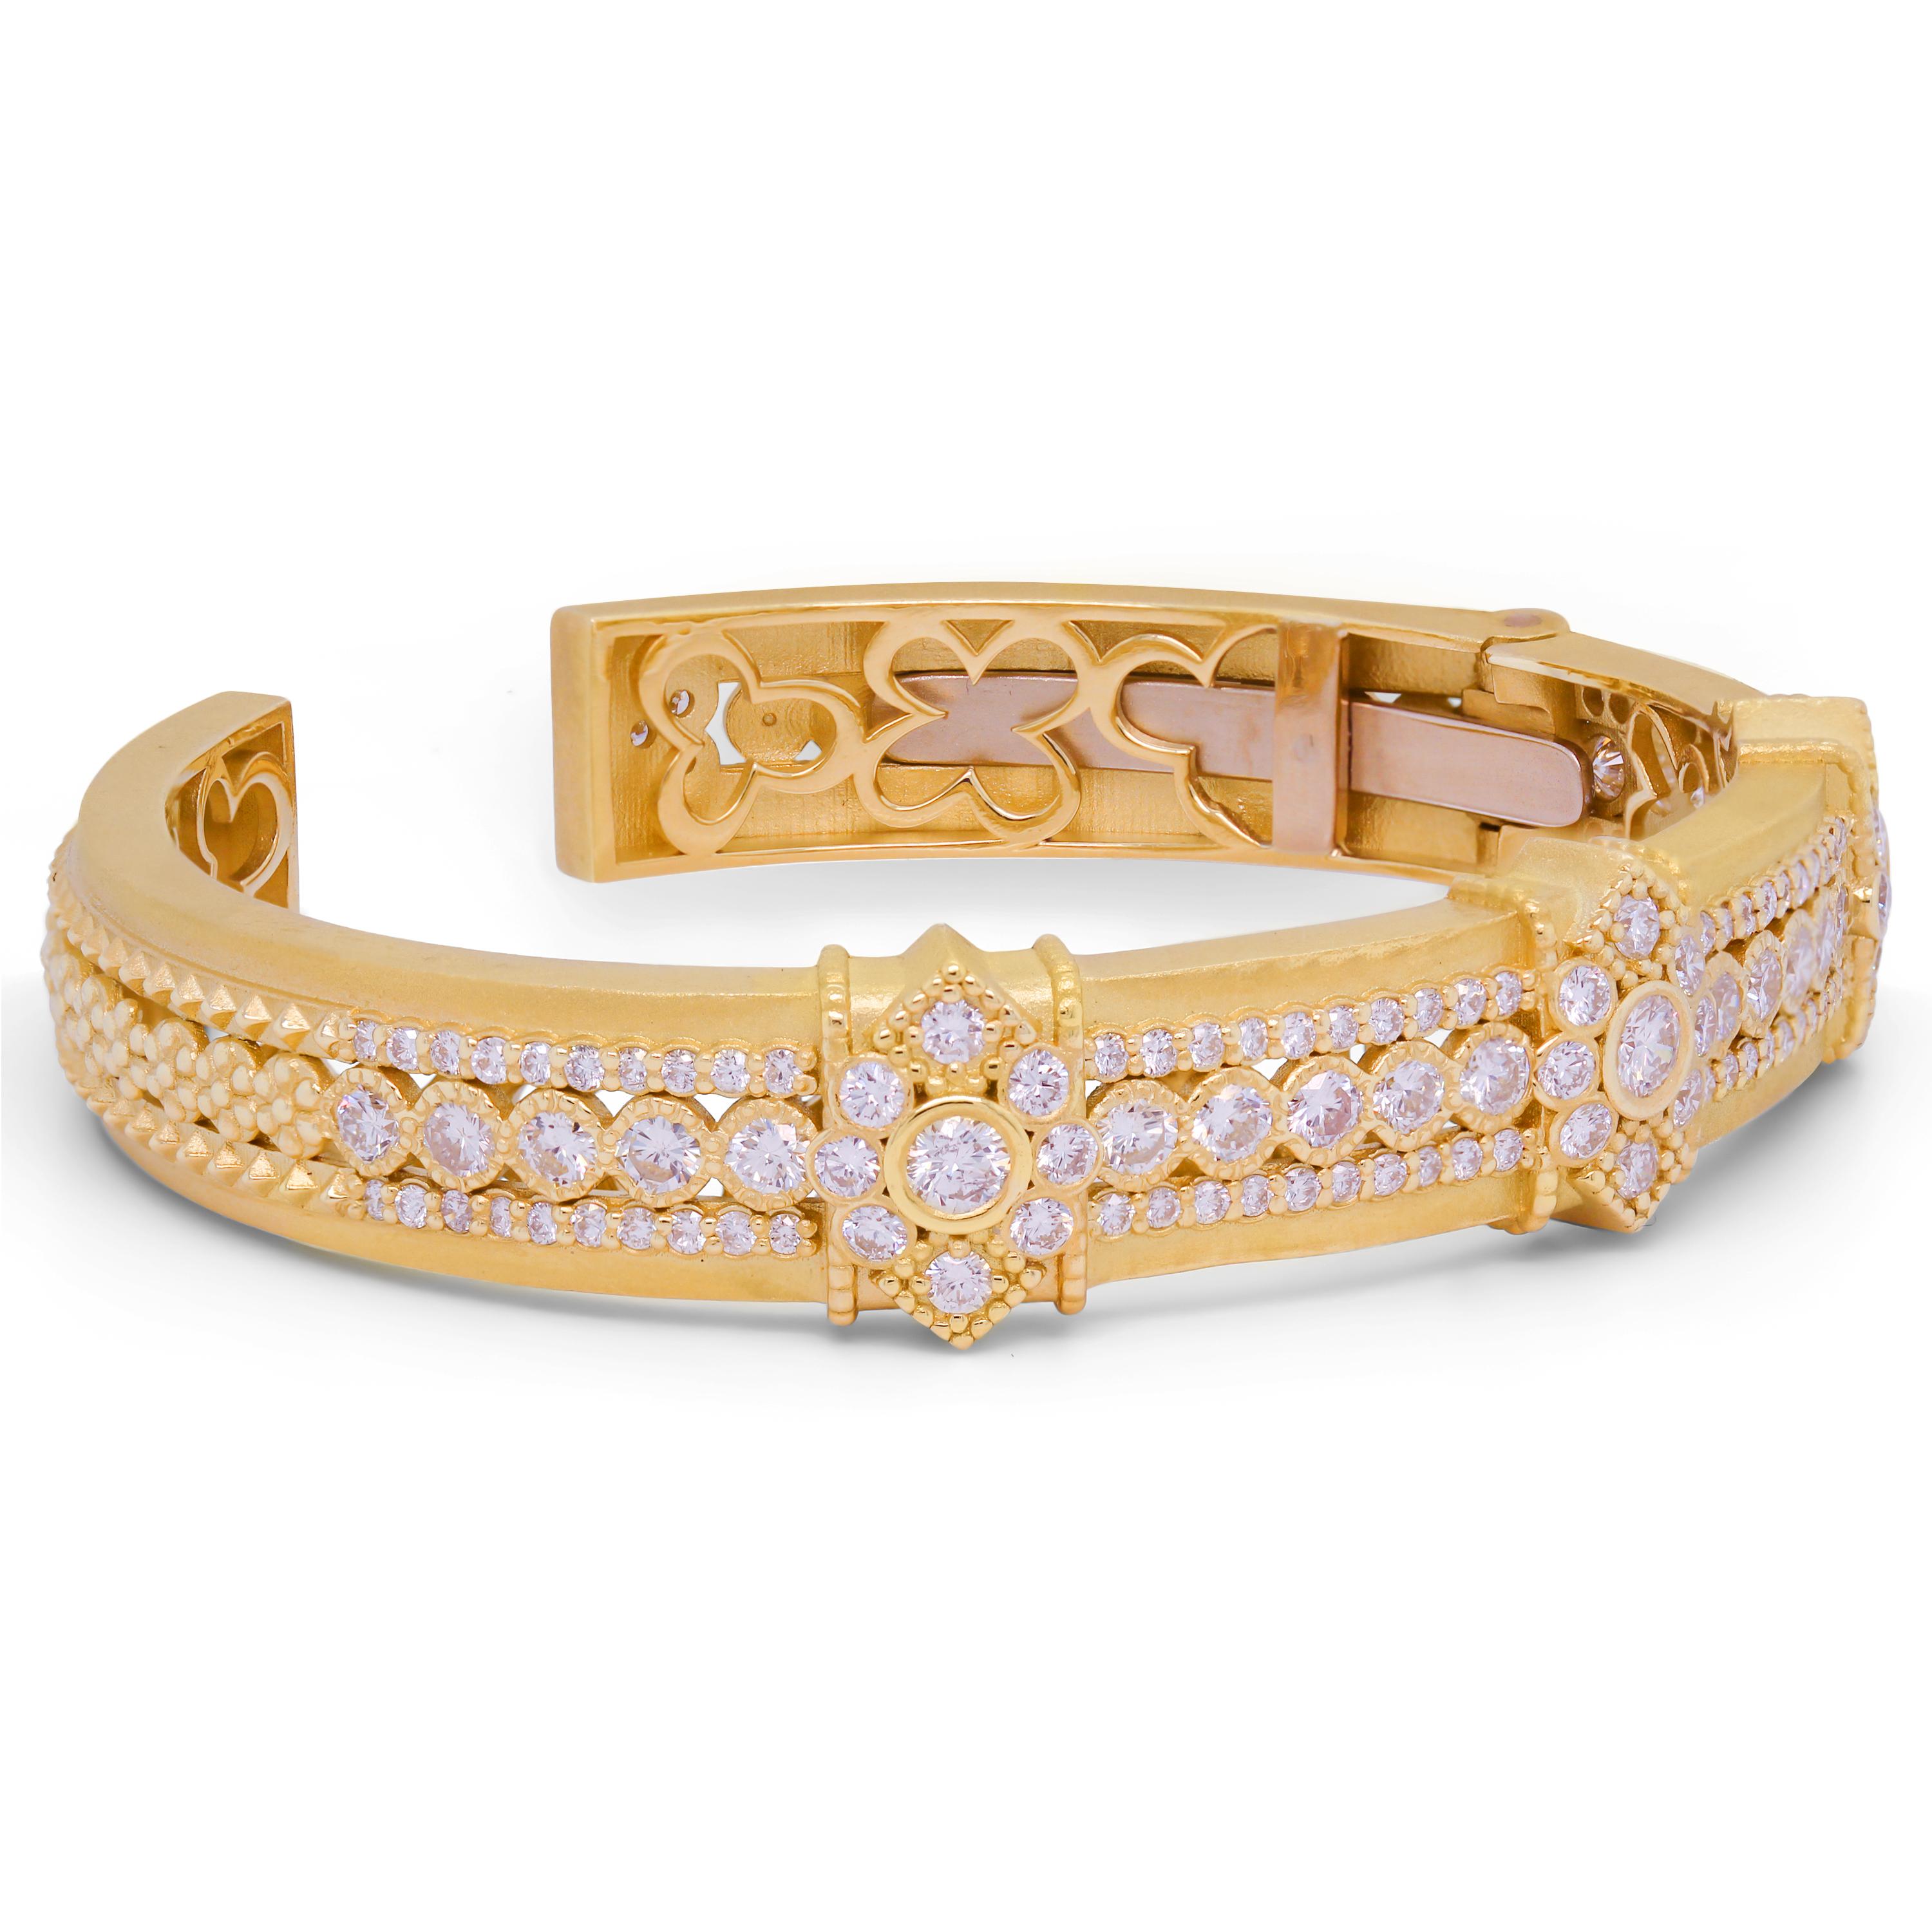 Stambolian 18K Yellow Gold and Diamond Bangle Bracelet

This state-of-the-art, handmade bracelet showcases the craftsmanship and design all throughout the piece. Diamonds are set on just about every aspect of his bangle. 

Apprx. 3.46 carat G color,